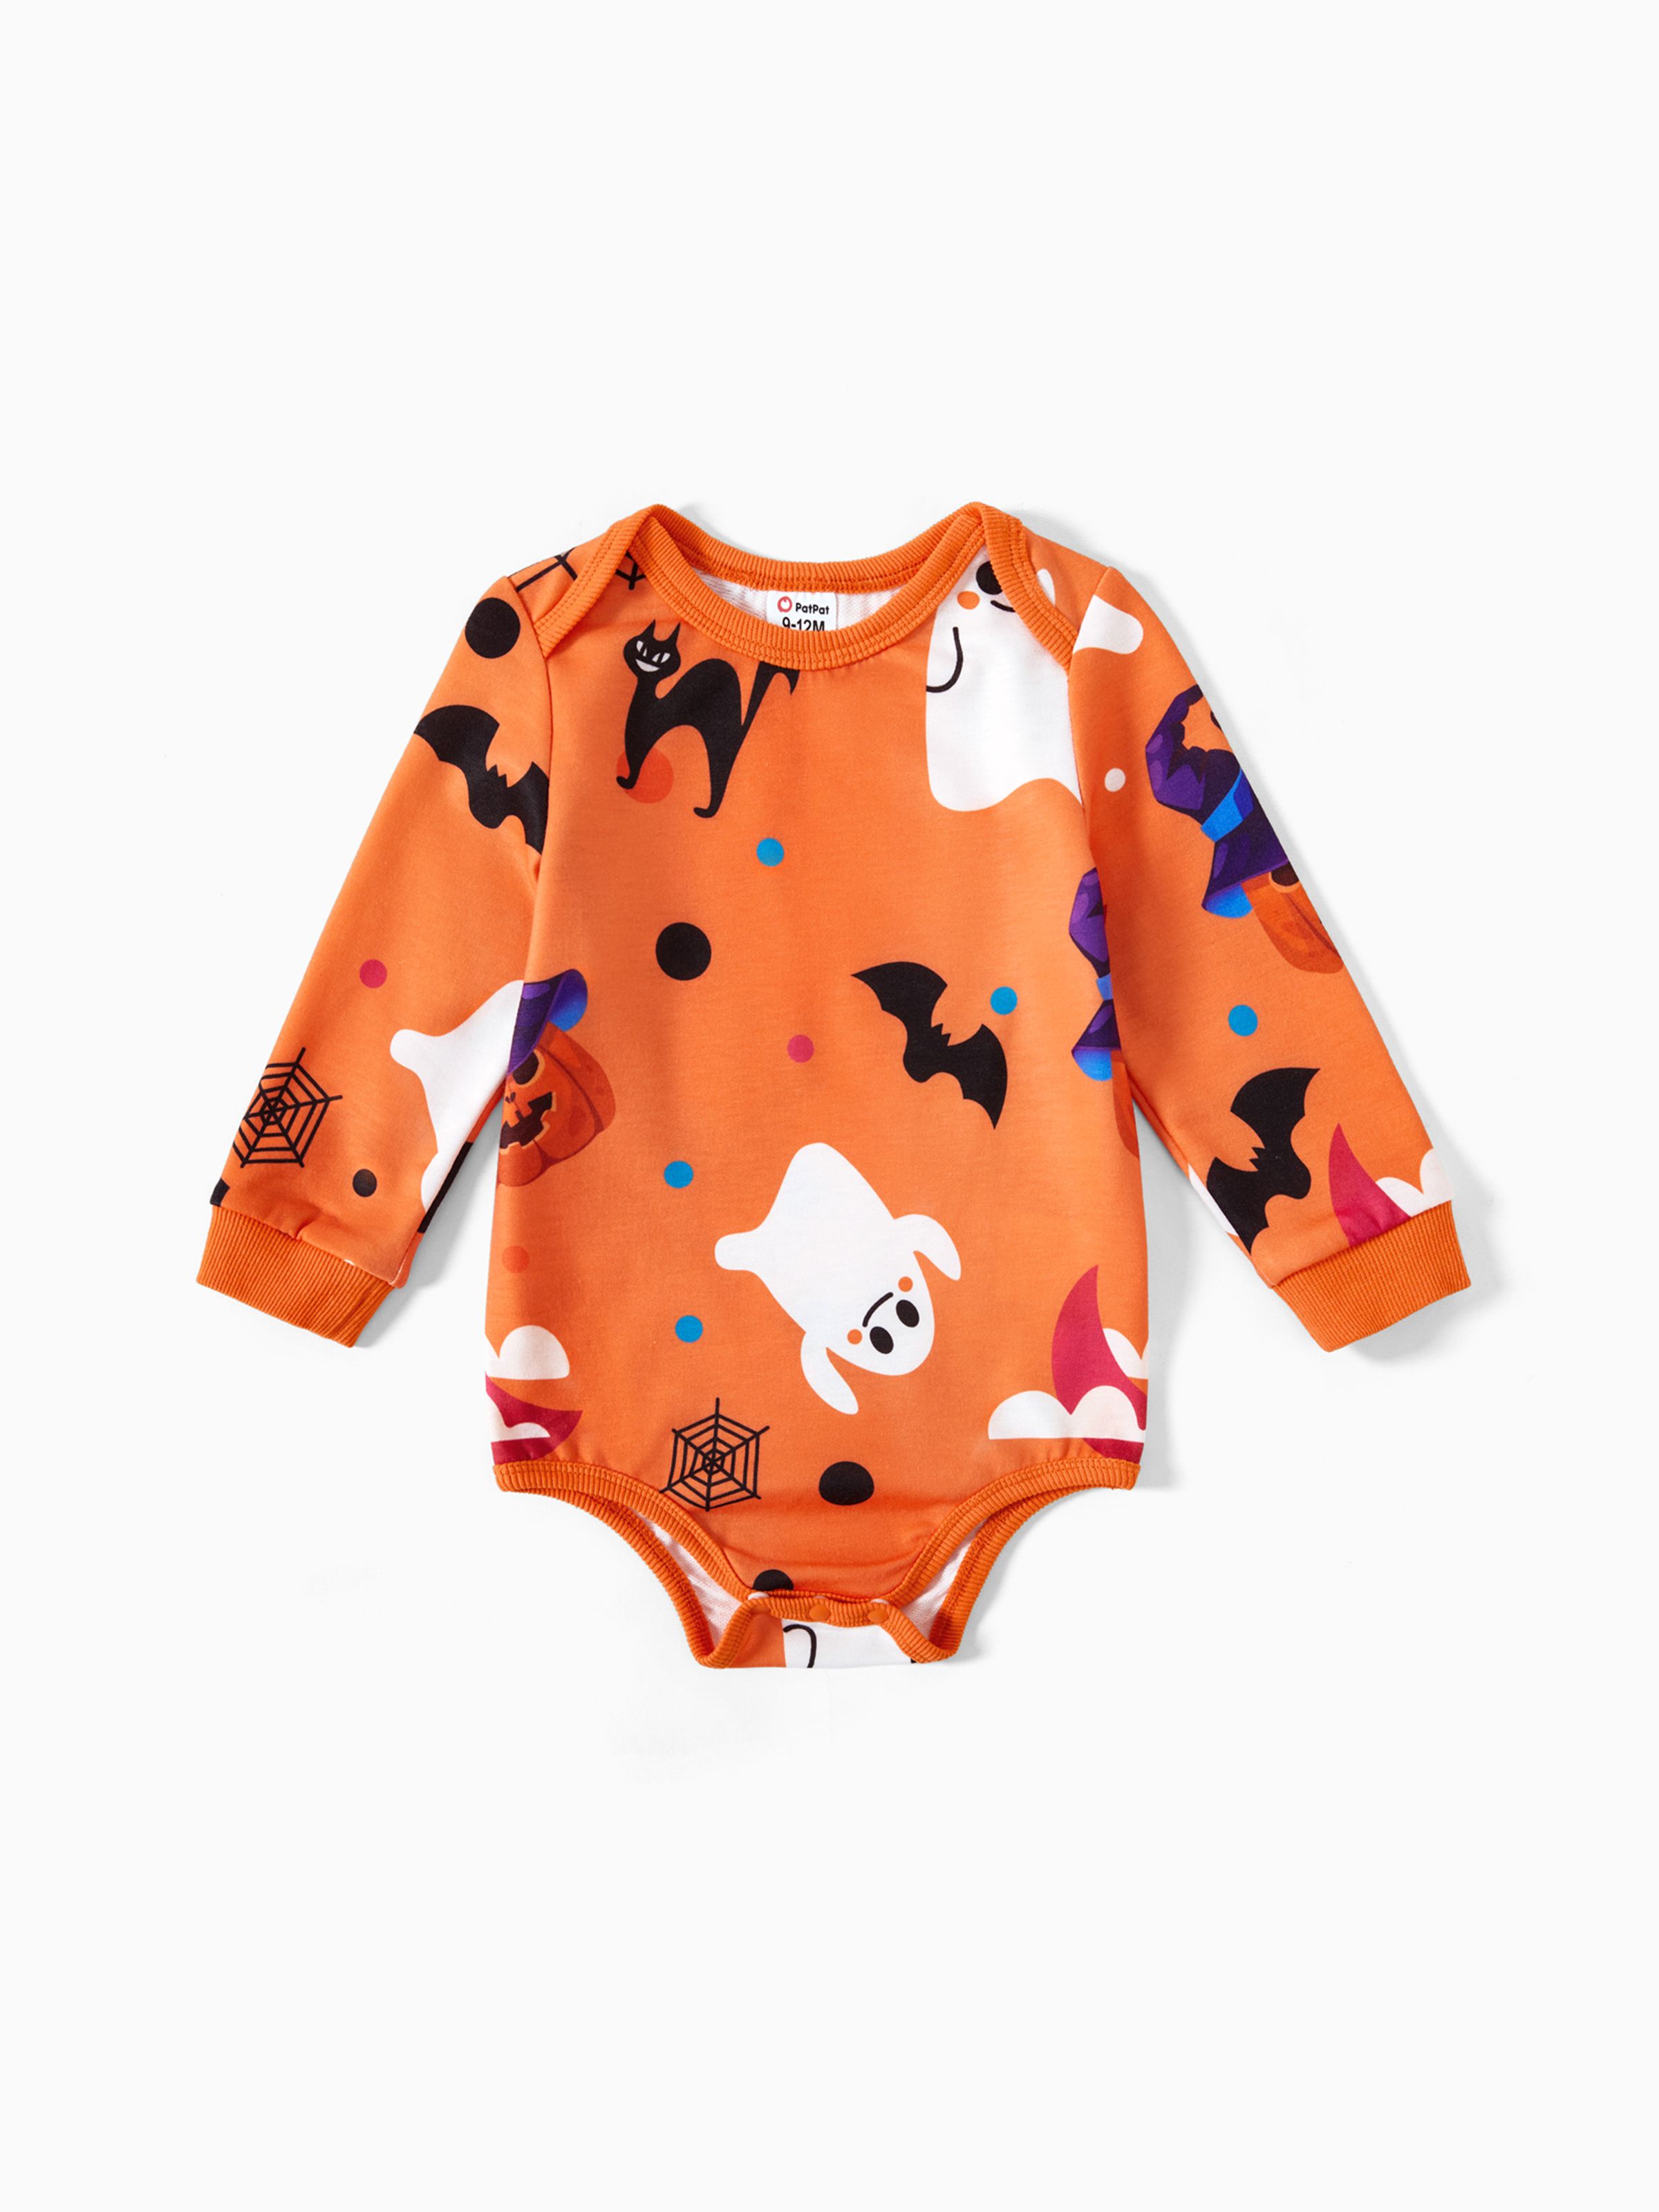 

Halloween Allover Ghost Print Orange Long-sleeve Sweatshirts for Mom and Me